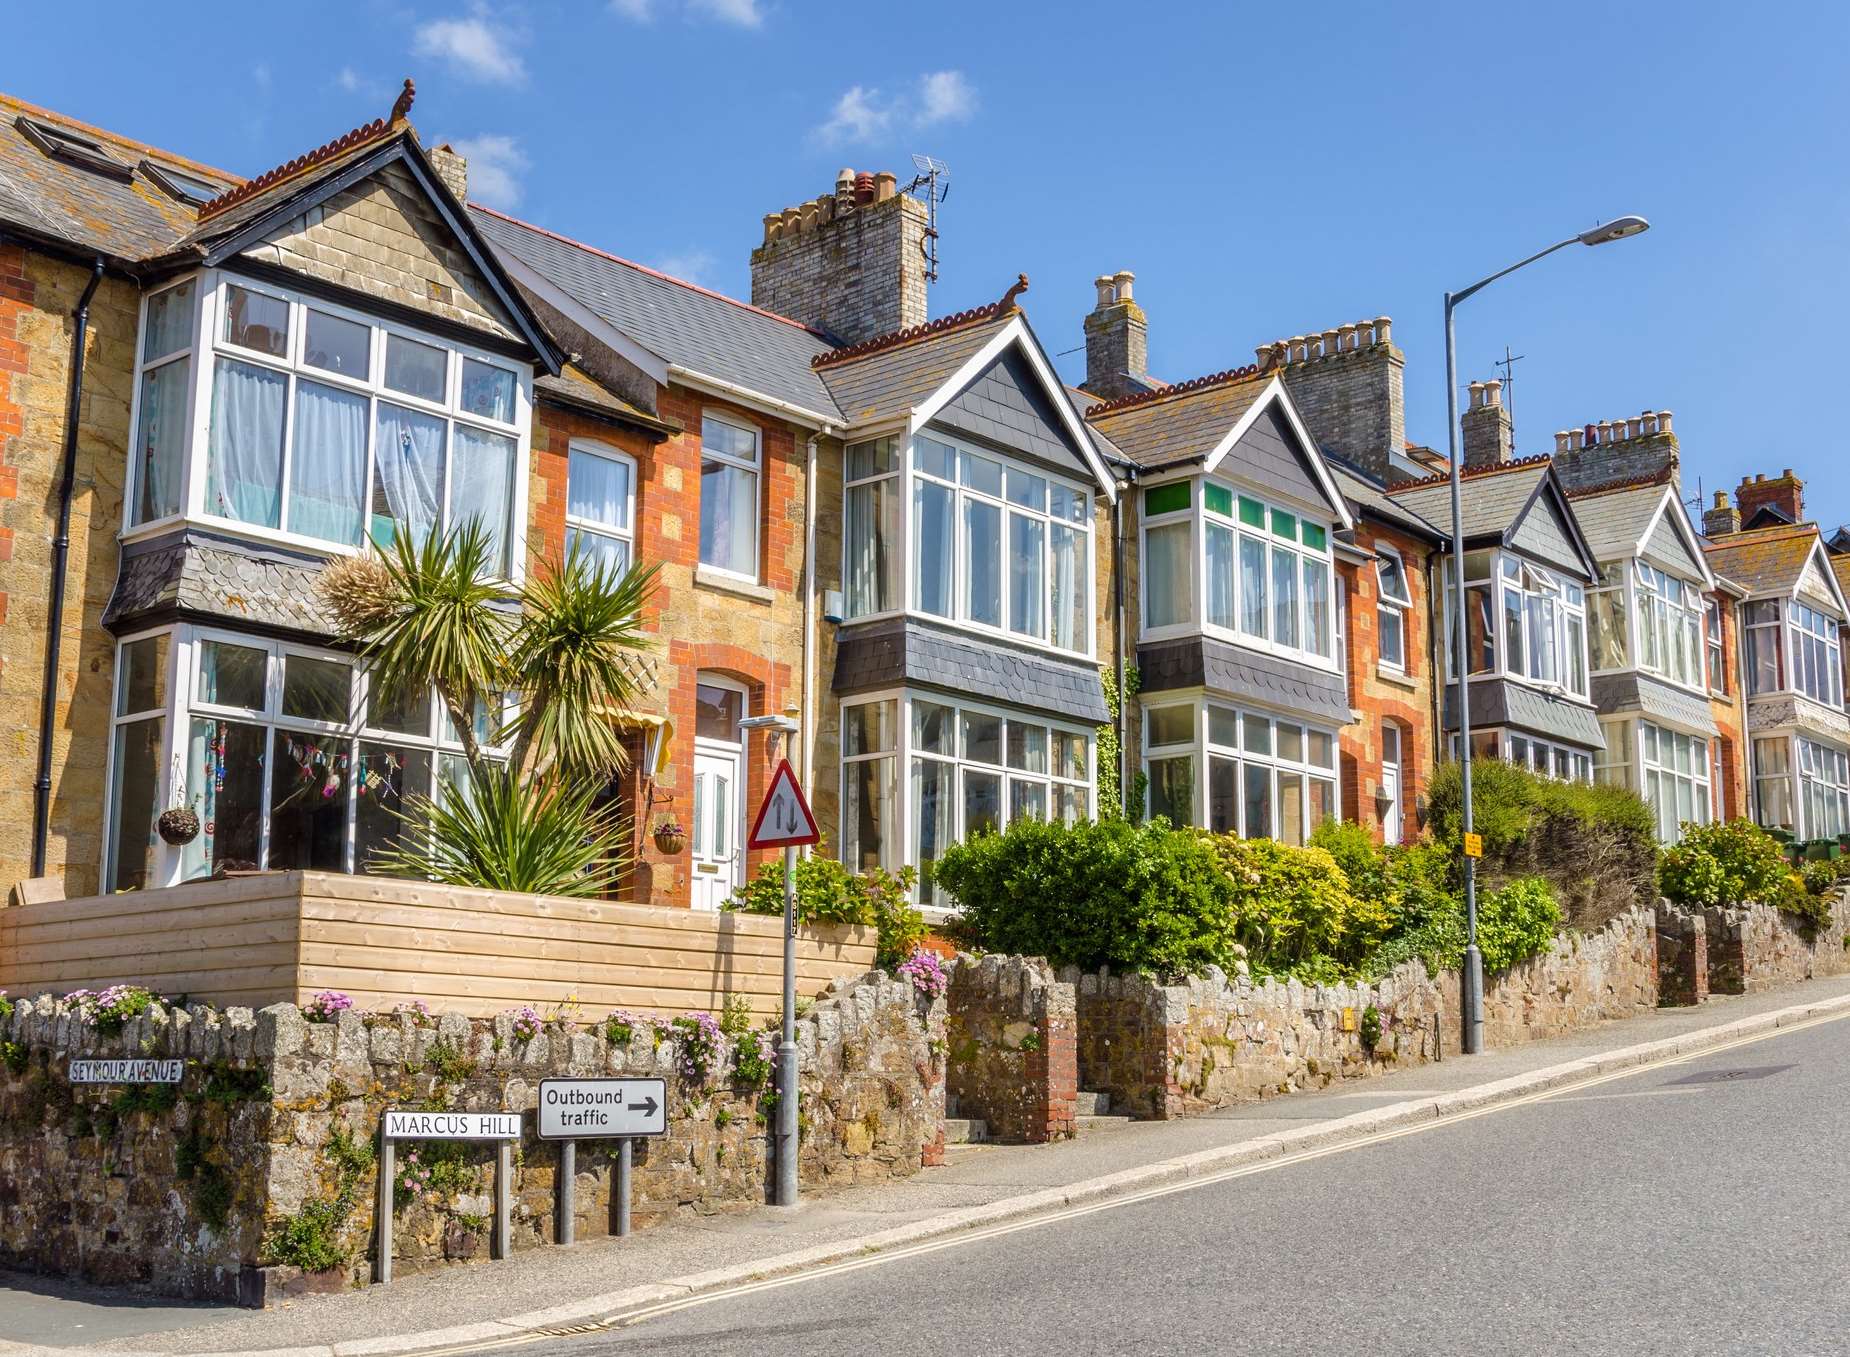 Tell us your views on your local property market for a chance to win £50